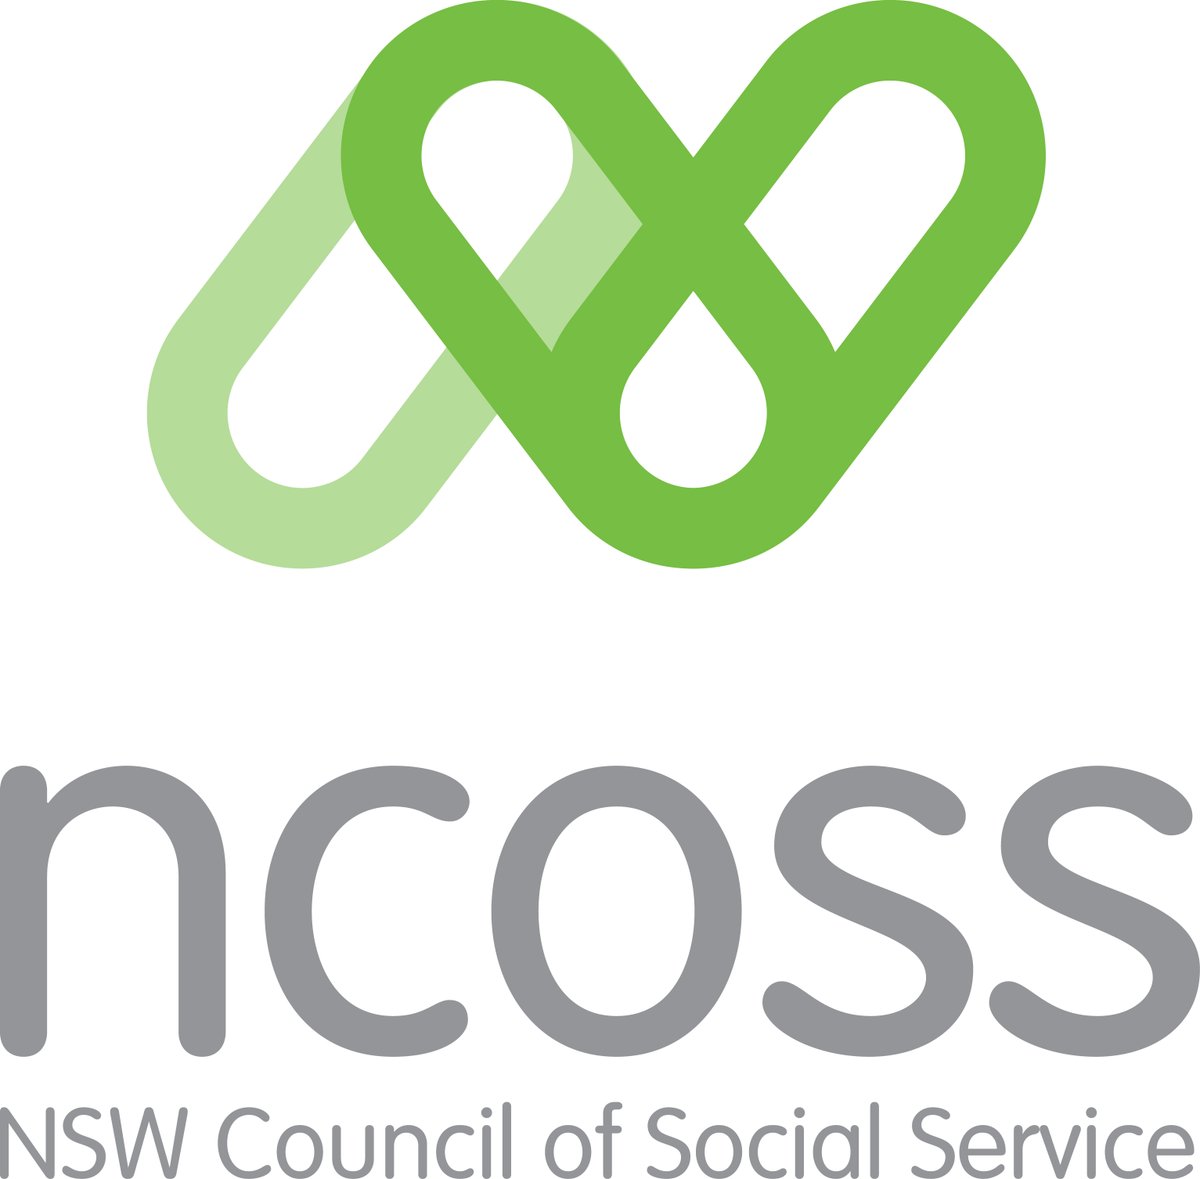 NCOSS welcomed some of the investments in the NSW Government’s 2023-24 Budget, but called for urgent support for those living in poverty. Read our media release bit.ly/45Z92mI